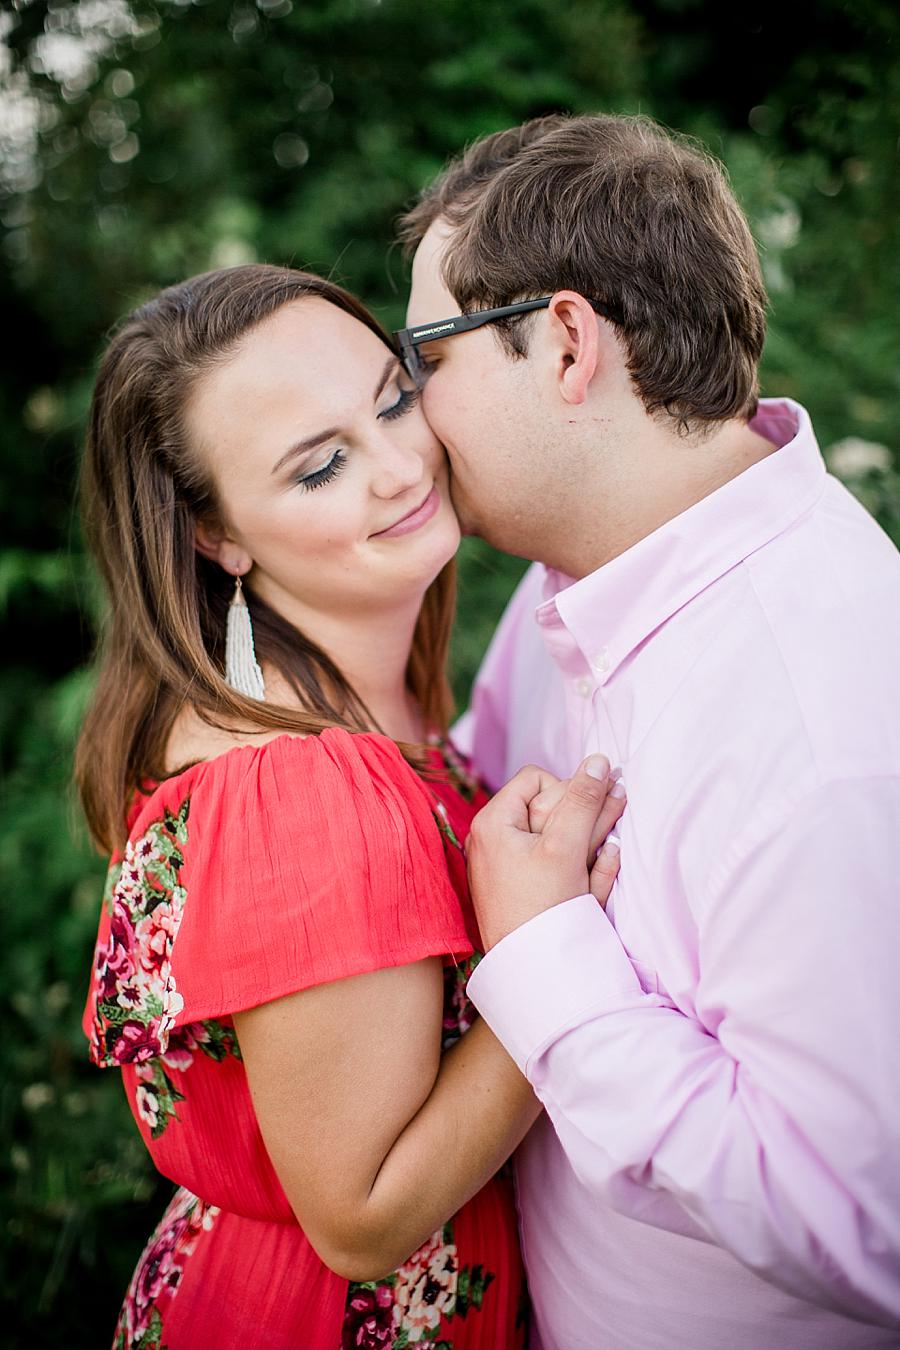 Kiss on the cheek at this Whitestone Country Inn Engagement Session by Knoxville Wedding Photographer, Amanda May Photos.